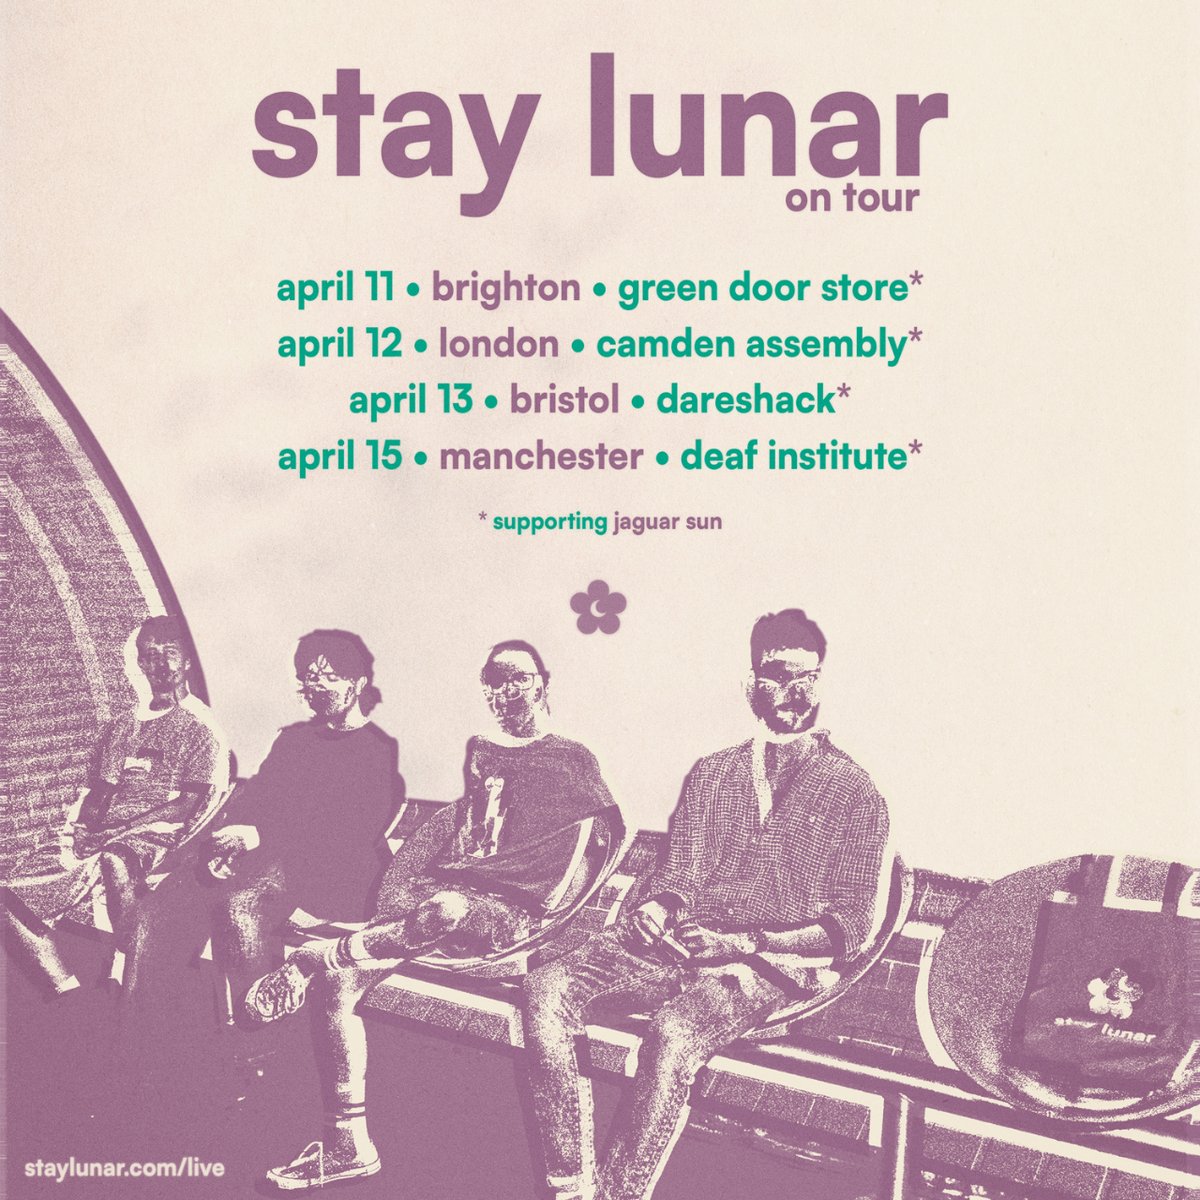 if you missed the news last week, we're heading out on a small UK tour with Jaguar Sun, and it's happening real soon! tickets are available from our website (staylunar.com/live). this'll be our debut in Brighton and Manchester, so we can't wait!